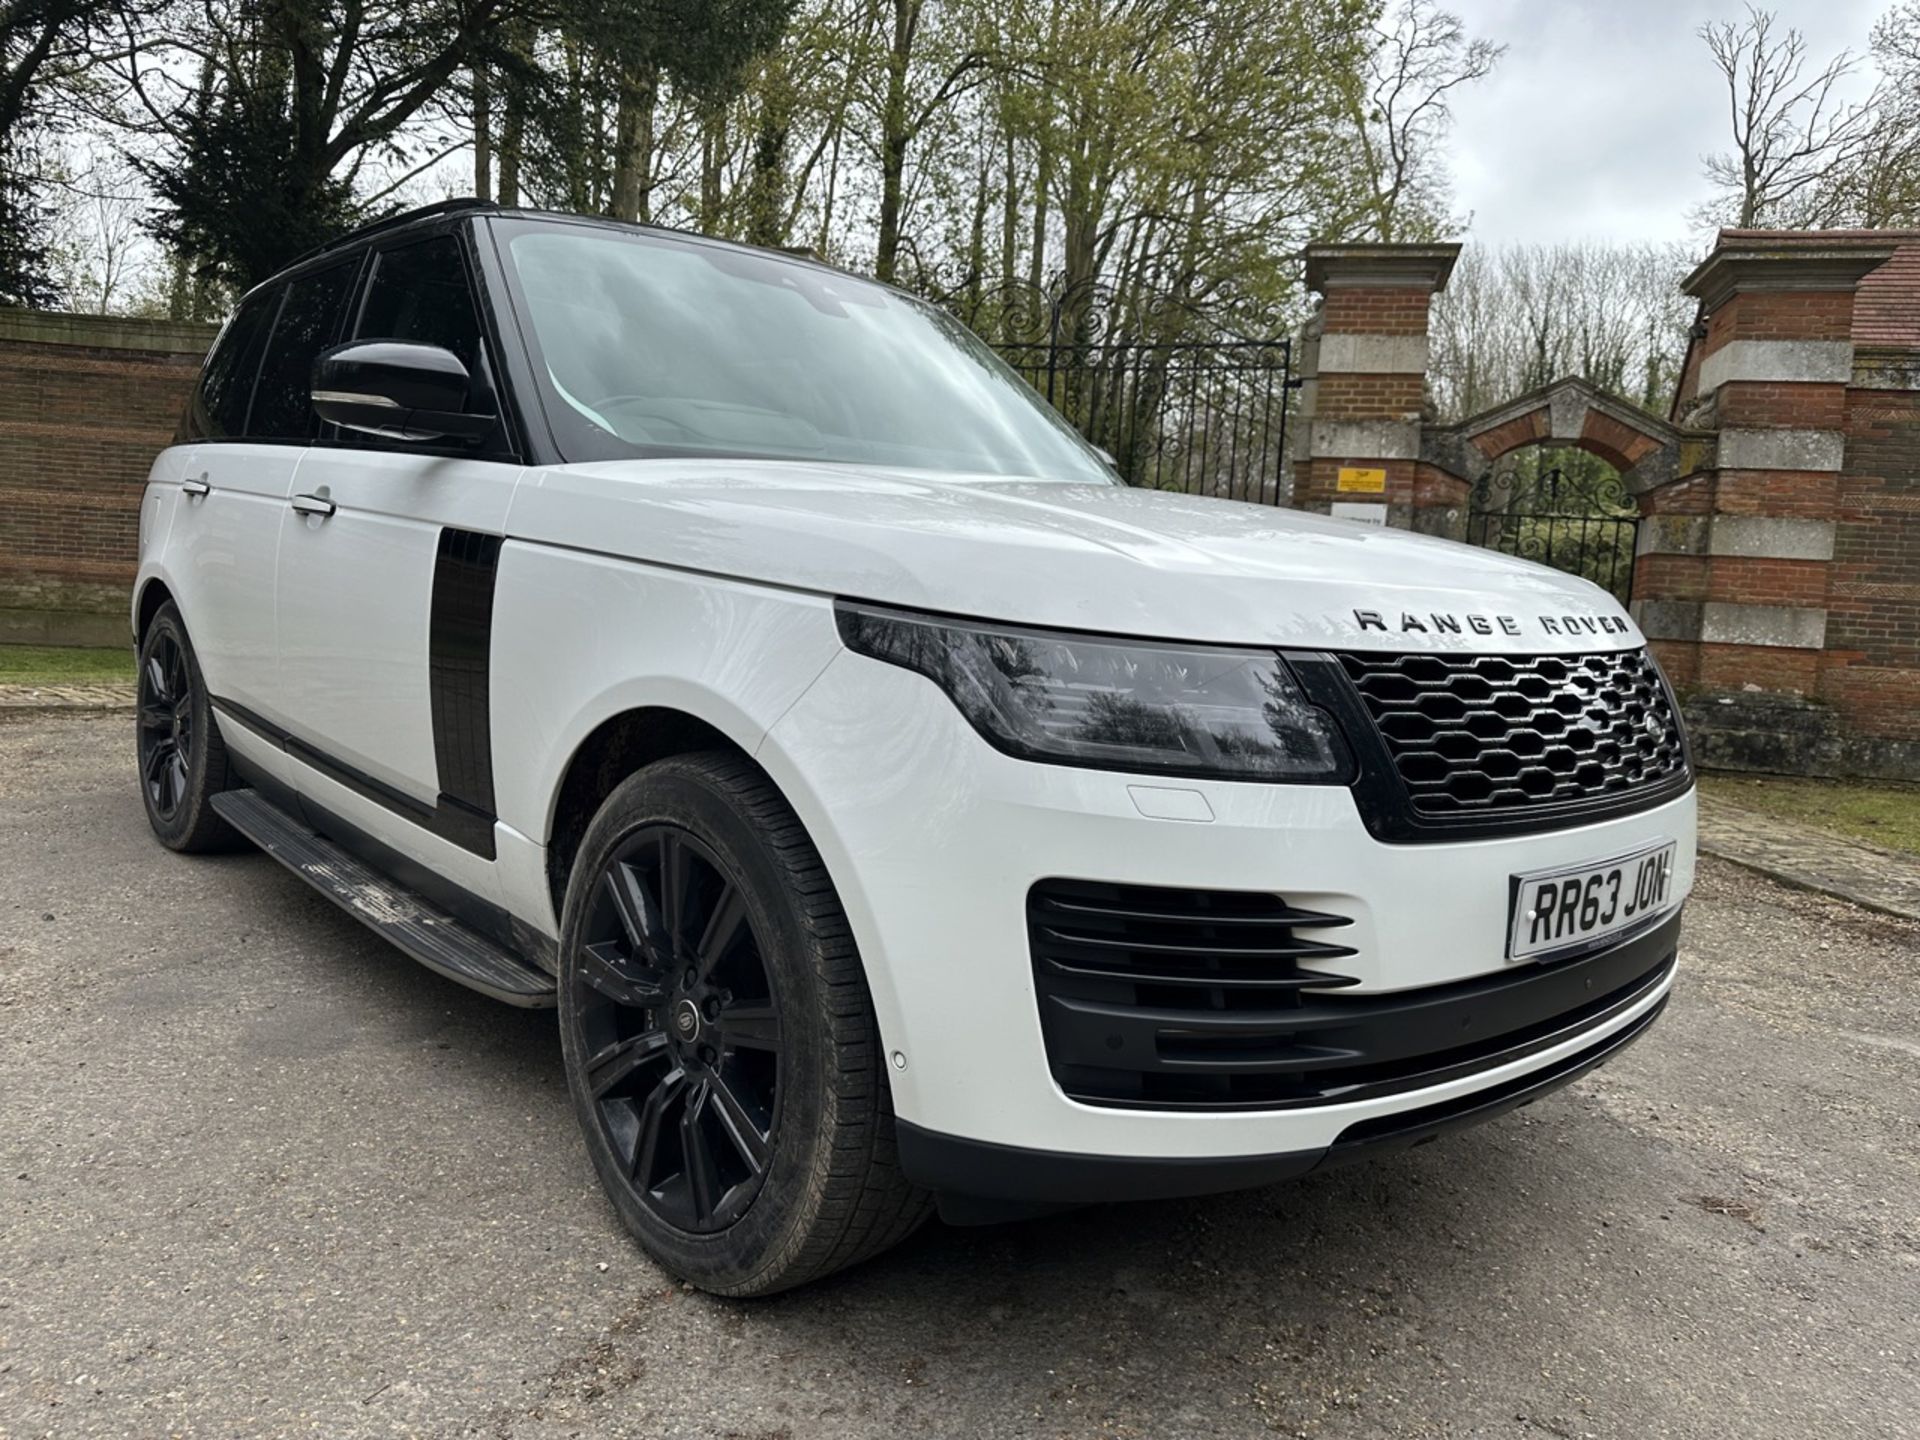 LAND ROVER RANGE ROVER 2.0 P400e Autobiography 4dr Auto - Automatic - 2018 - 31k miles - FULL SH - Image 6 of 22